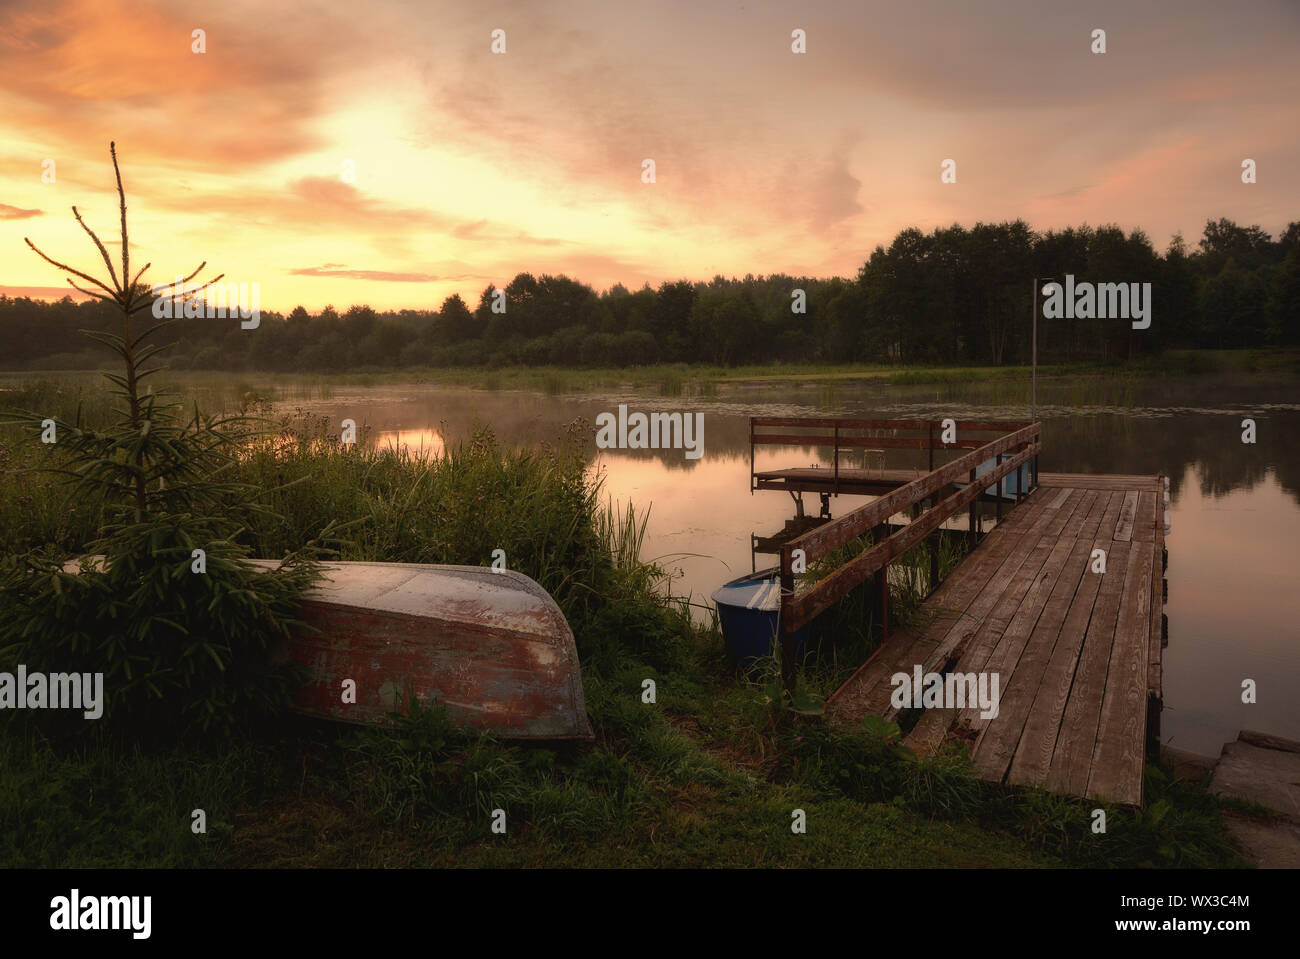 Summer sunset on a forested river with inverted boats and a old wooden pier Stock Photo